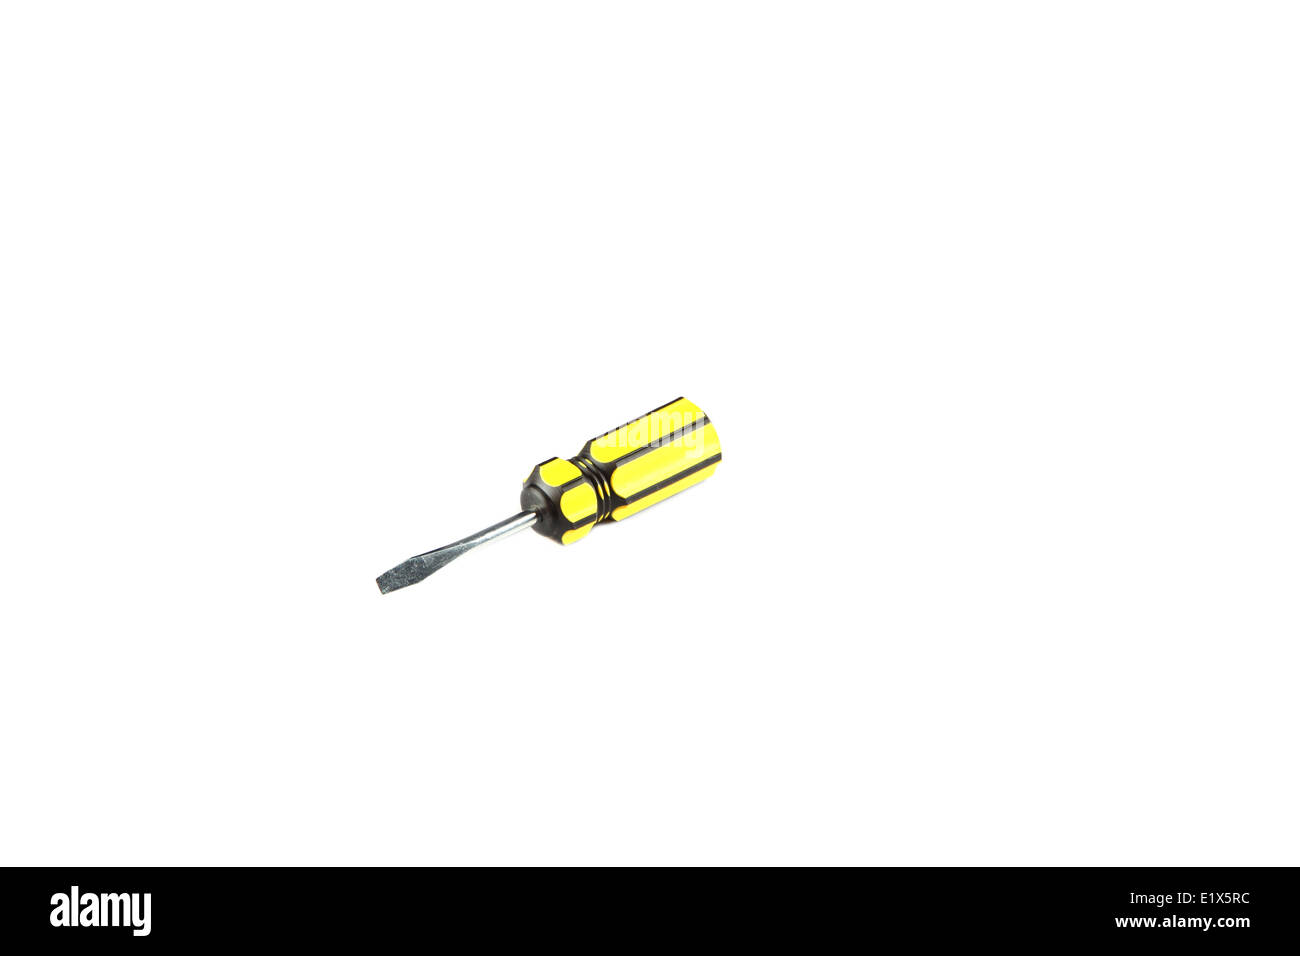 Yellow tool of screwdriver isolated on white background. Stock Photo